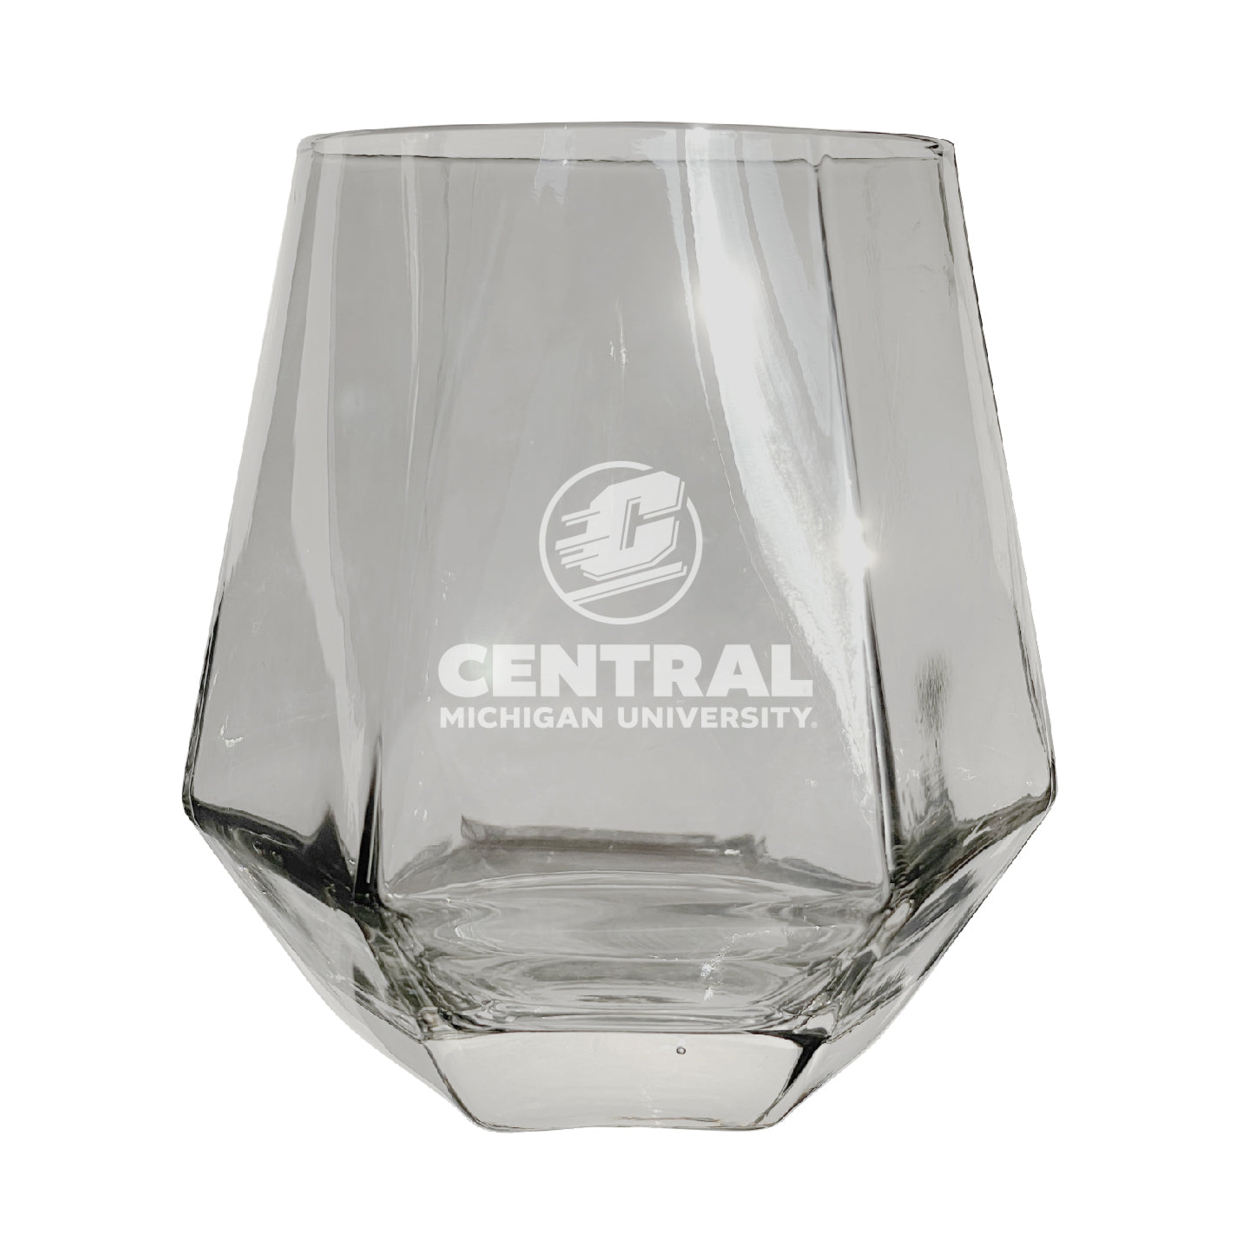 Central Michigan University Etched Diamond Cut Stemless 10 Ounce Wine Glass Clear